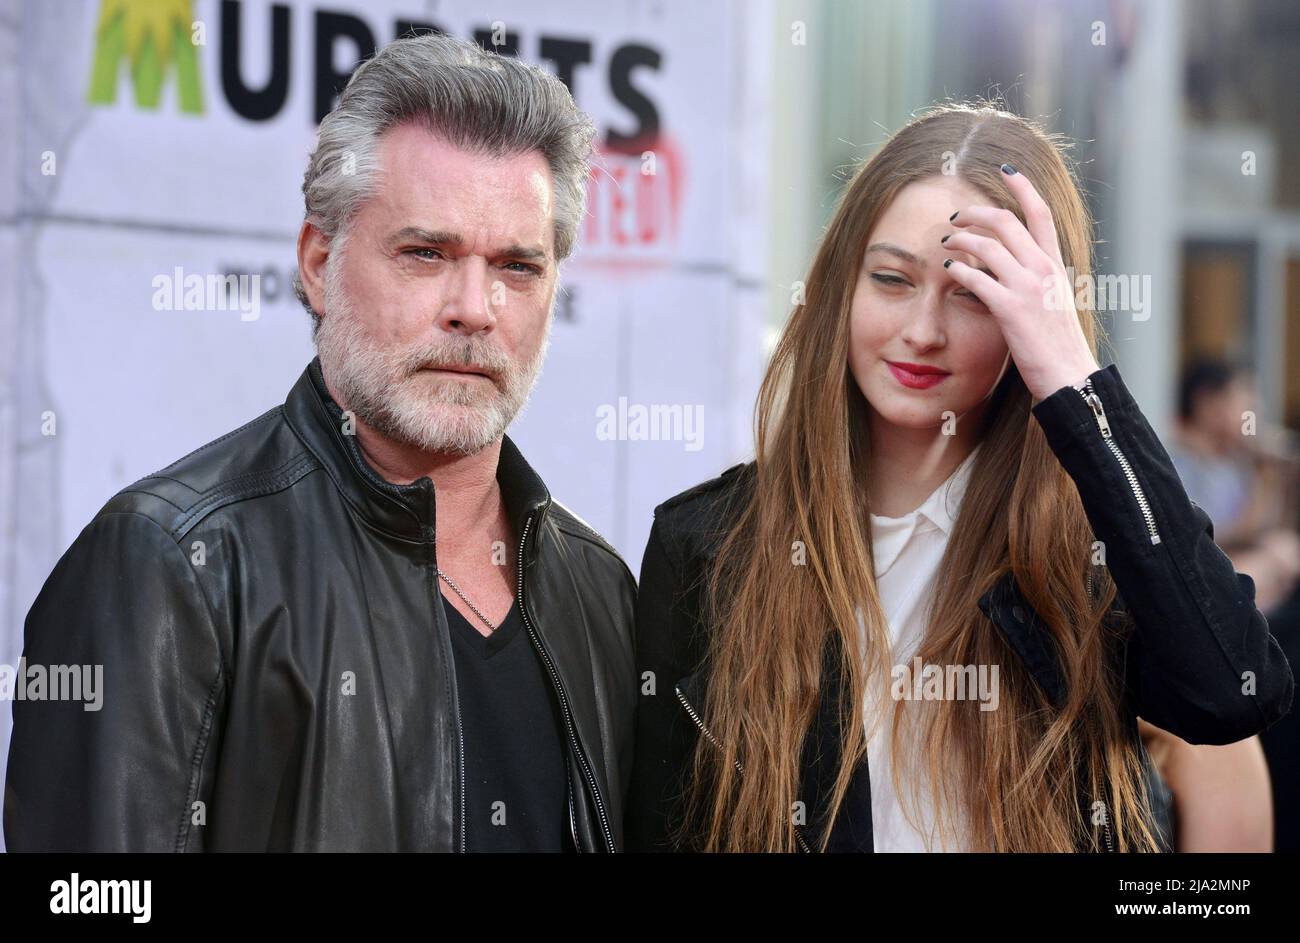 Los Angeles, USA. 11th Mar, 2014. Ray Liotta and daughter Karsen Liotta arriving at the Muppets Most Wanted Premiere at the El Capitan Theatre in Los Angeles.Ray Liotta and daughter Karsen Liotta 079 Ray Liotta, the actor best known for playing mobster has died. He was 67. Credit: Tsuni/USA/Alamy Live News Stock Photo